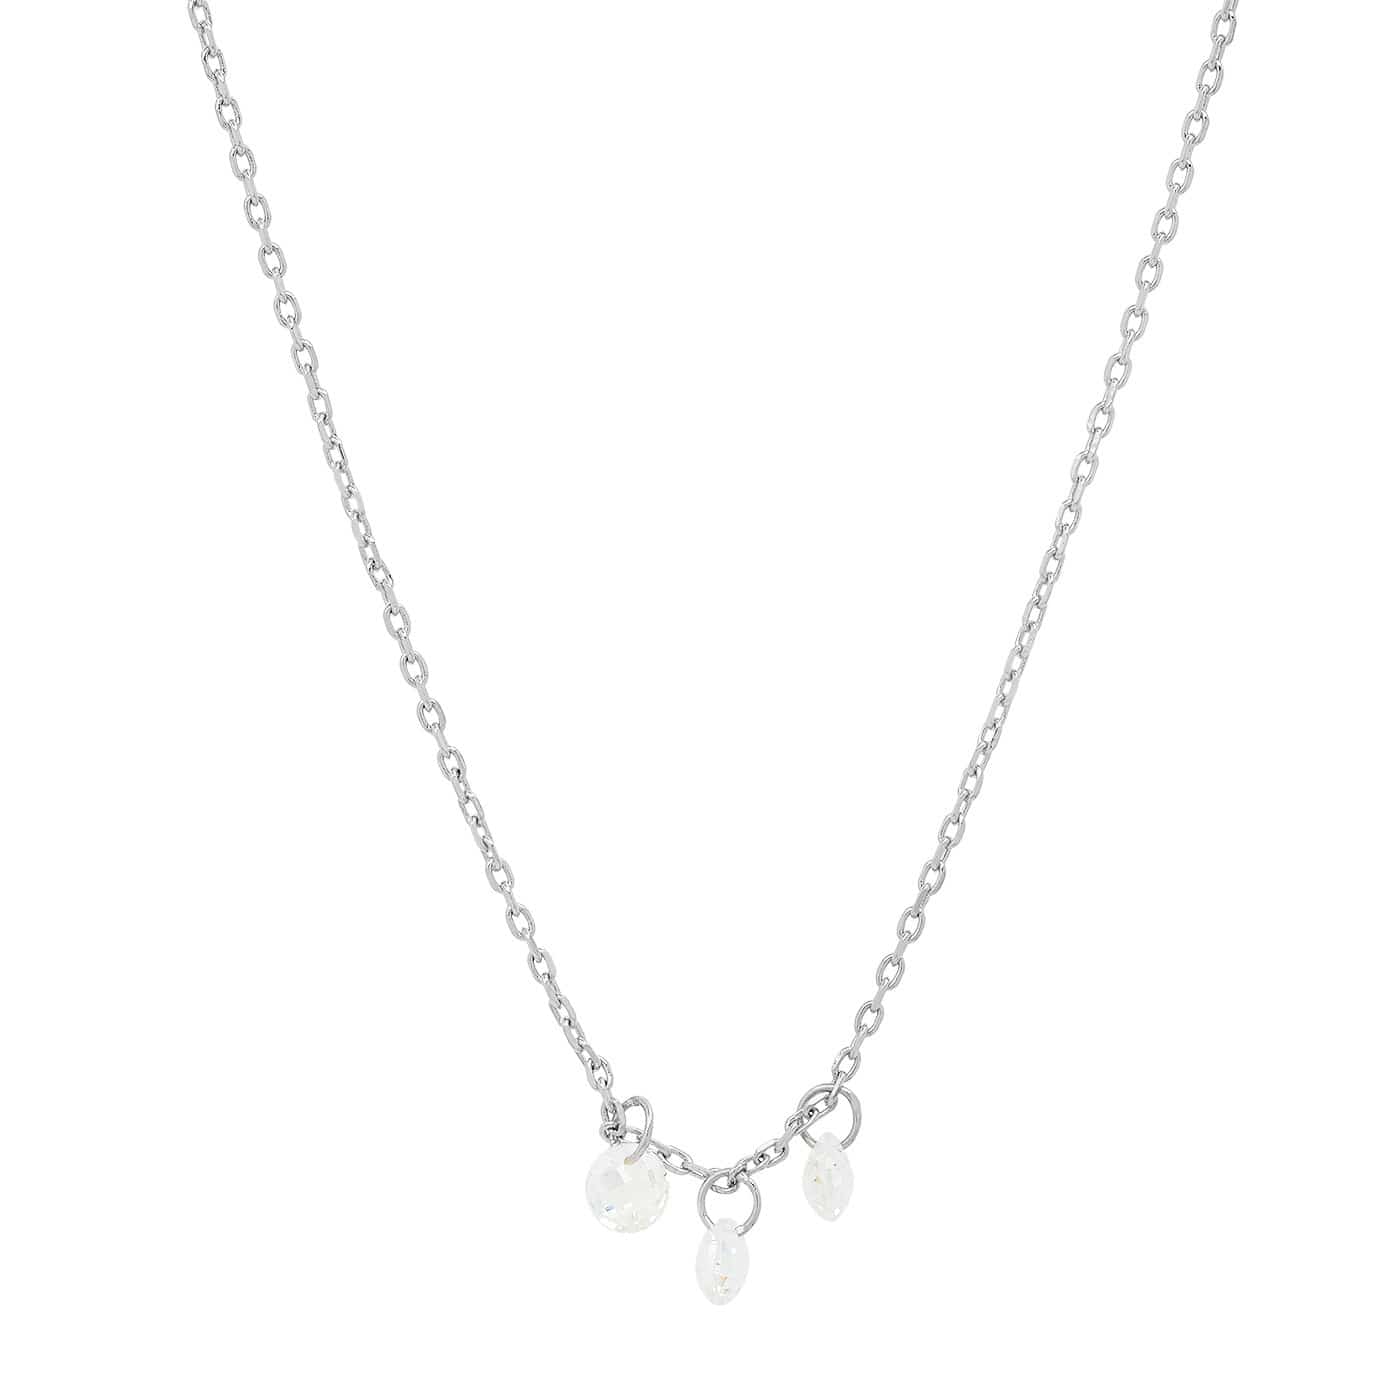 TAI JEWELRY Necklace Silver Delicate Chain Necklace With Three Floating Cz Stones